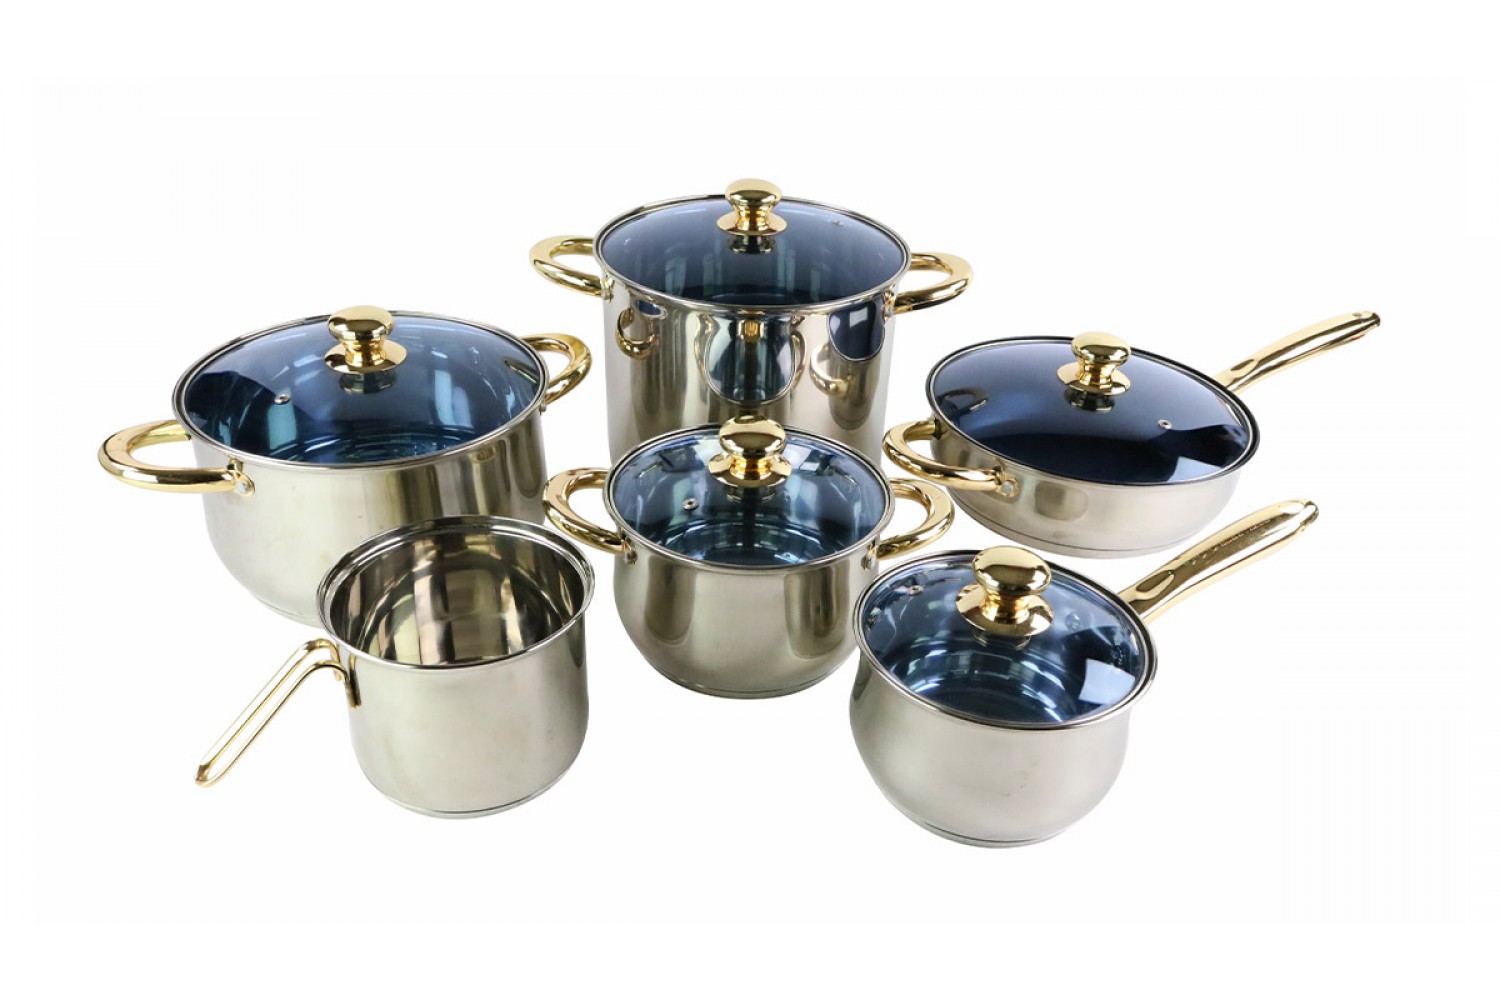 12-Piece Stainless Steel Cookware Set - Gold Plated Handle & Knob